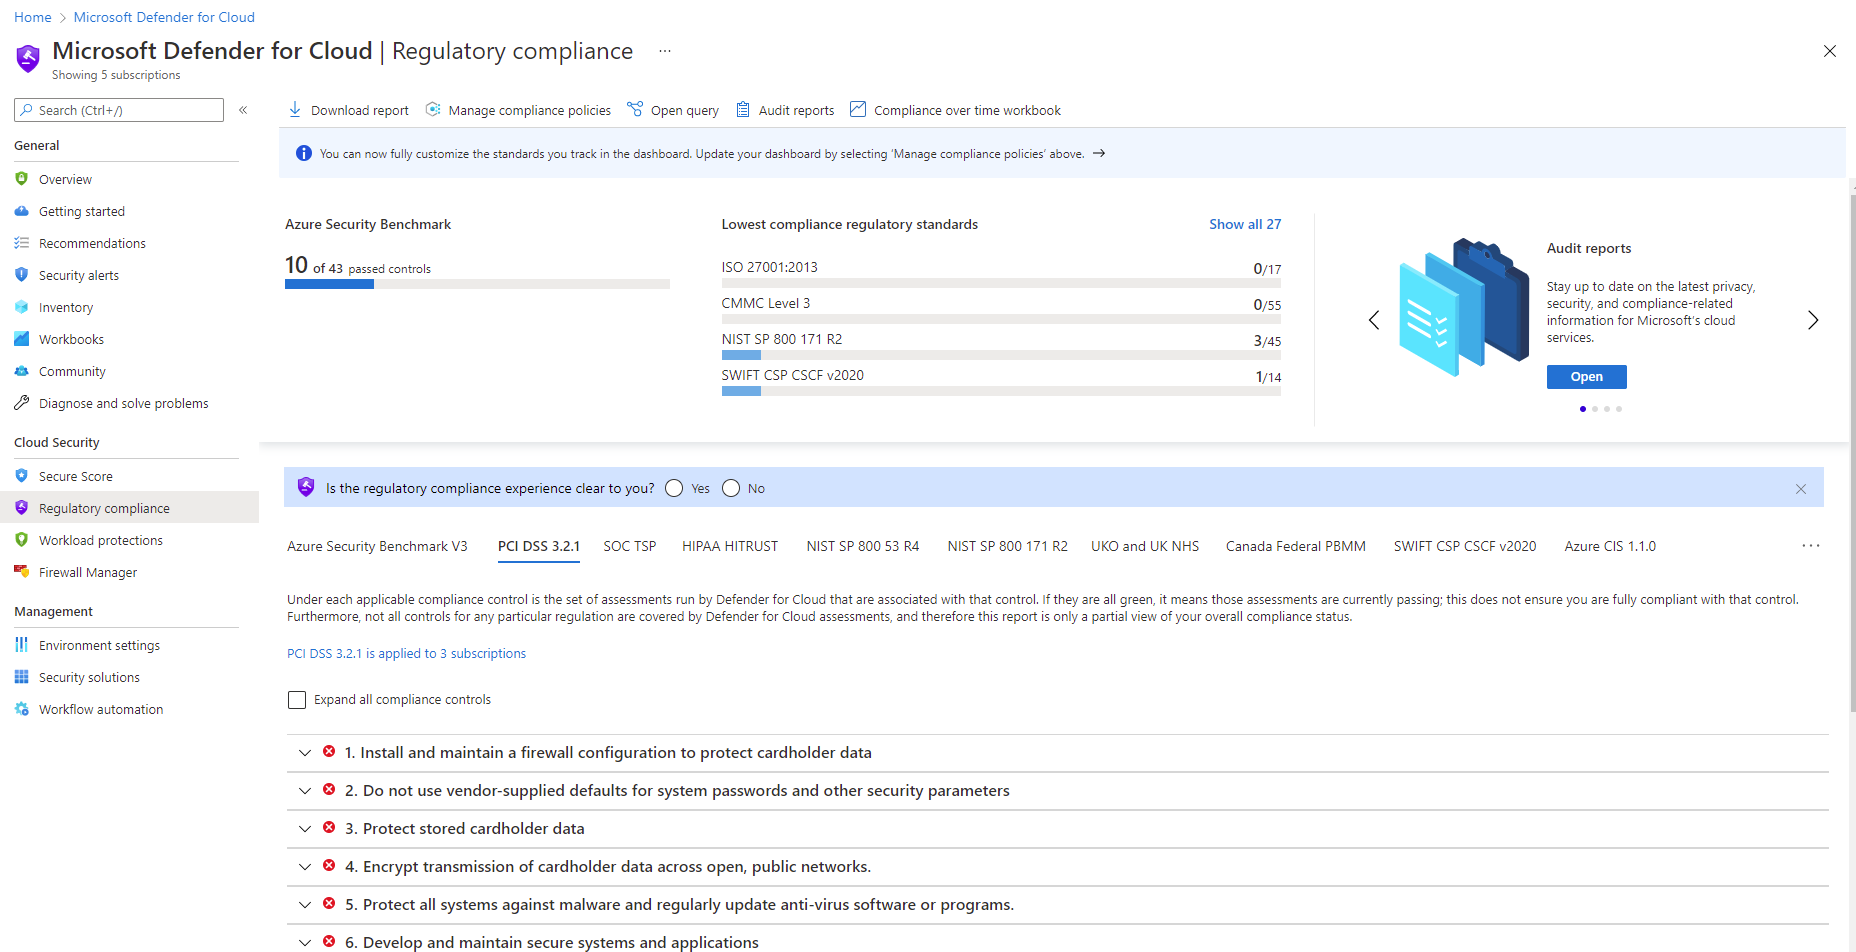 Screenshot showing an example of the Regulatory Compliance Dashboard in Microsoft Defender for Cloud.